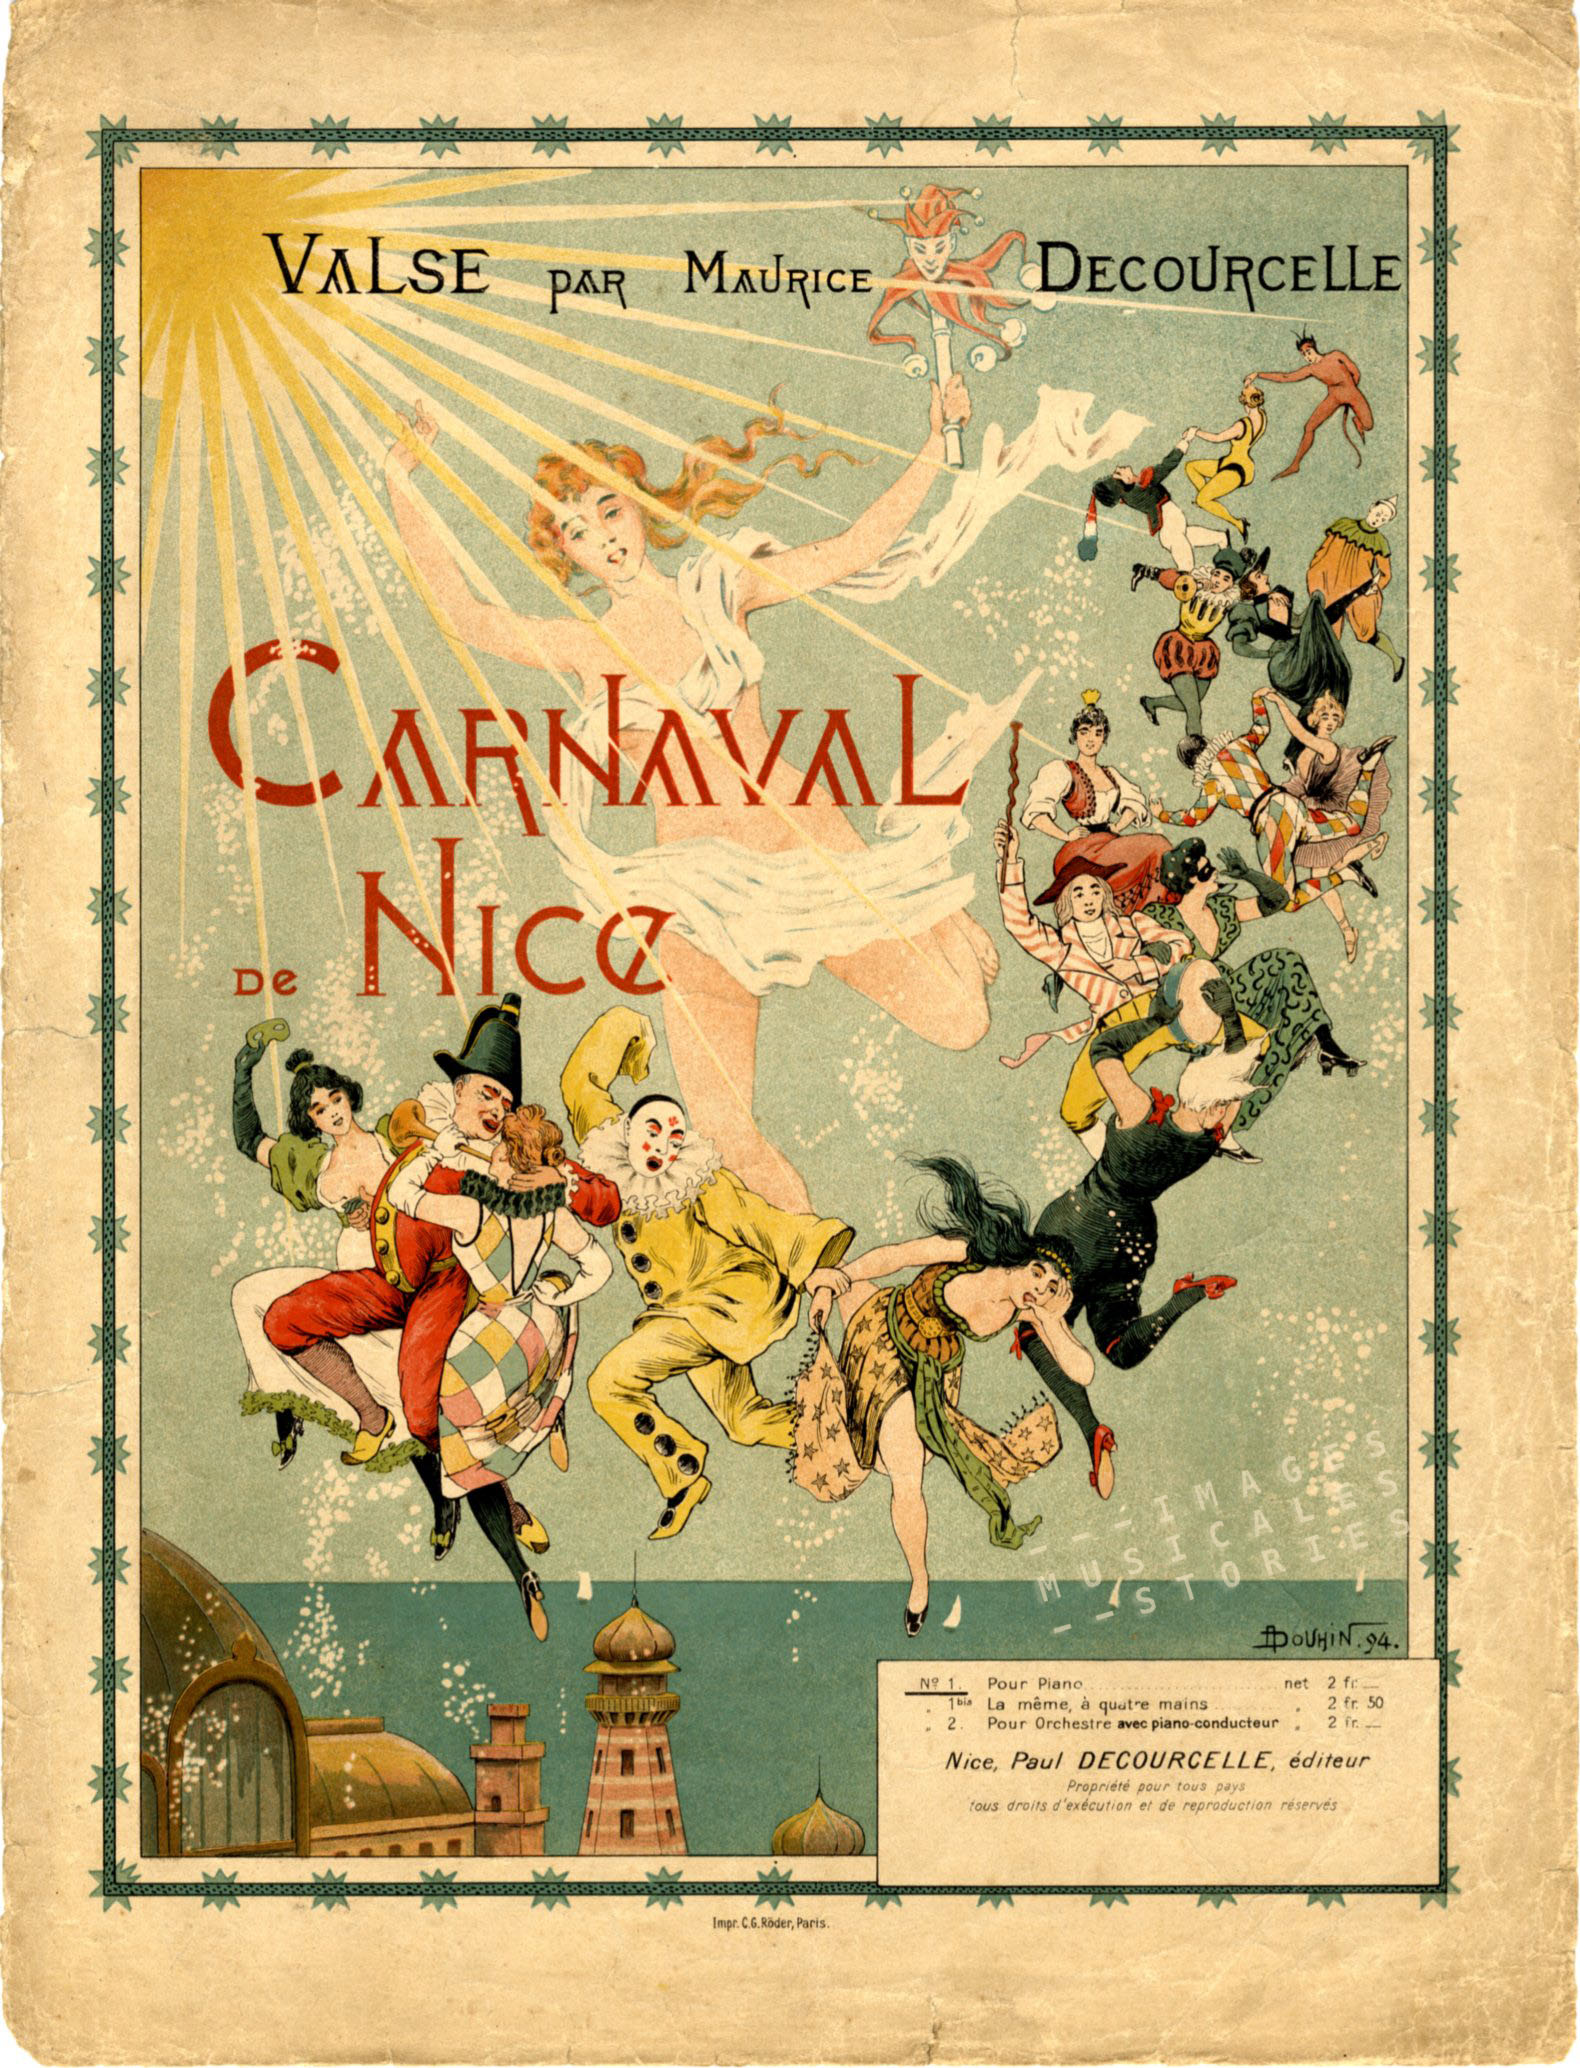 Sheet music for the Carnaval de Nice, Illustrated by Douhin in 1894.